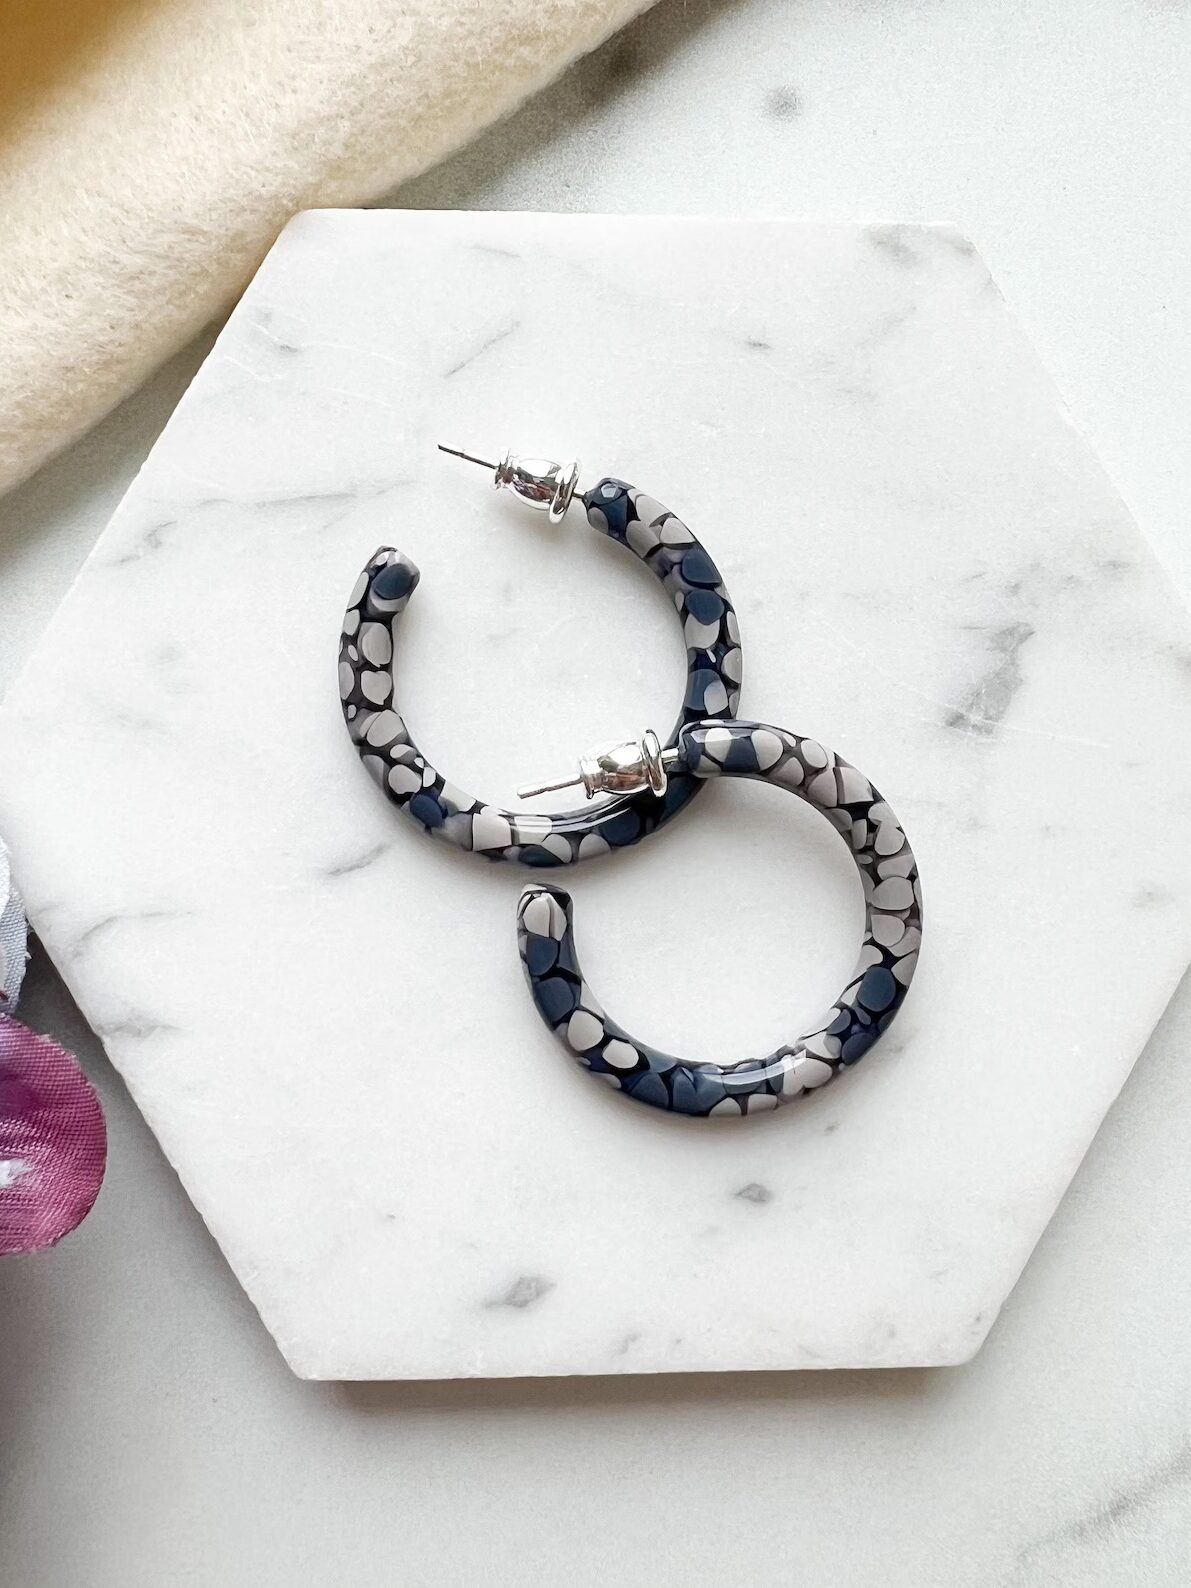 A pair of blue and white patterned hoop earrings rests on a white marble slab next to purple fabric.